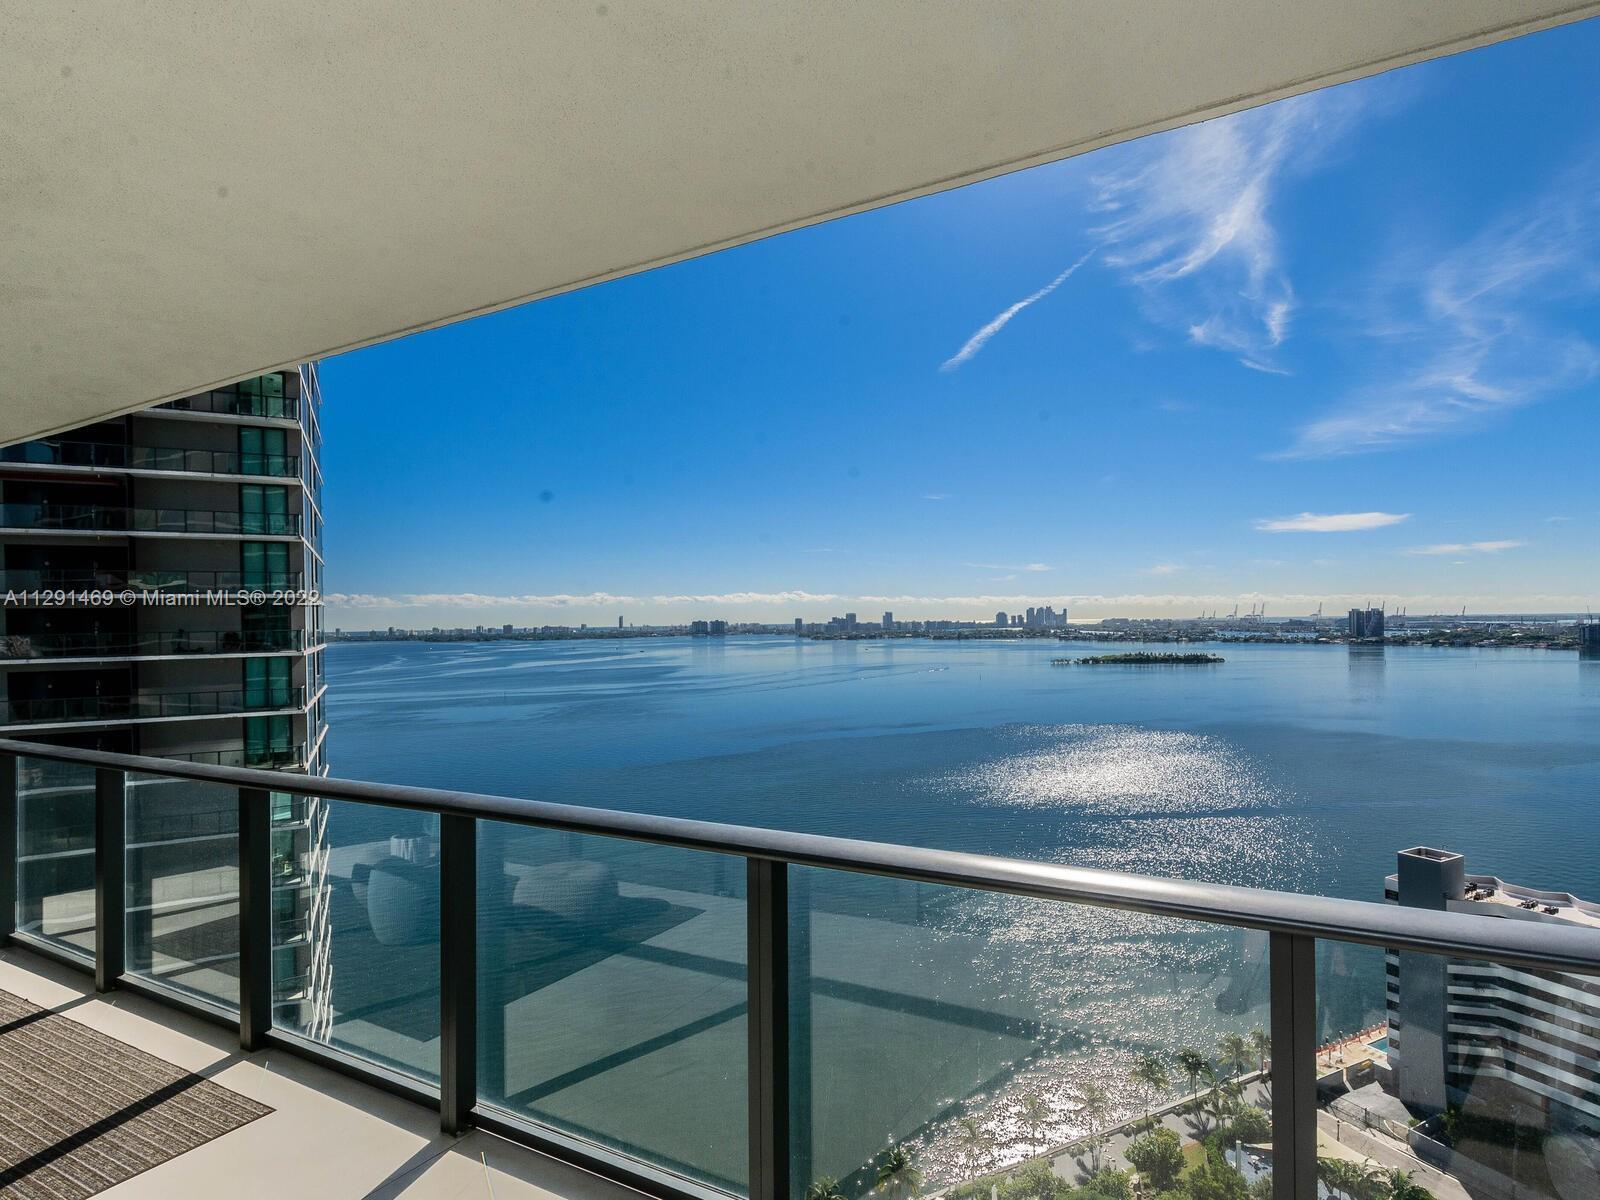 Chic Contemporary Waterfront Luxury in Cosmopolitan Heart of Miami. Built in 2018 amid the trendy, f